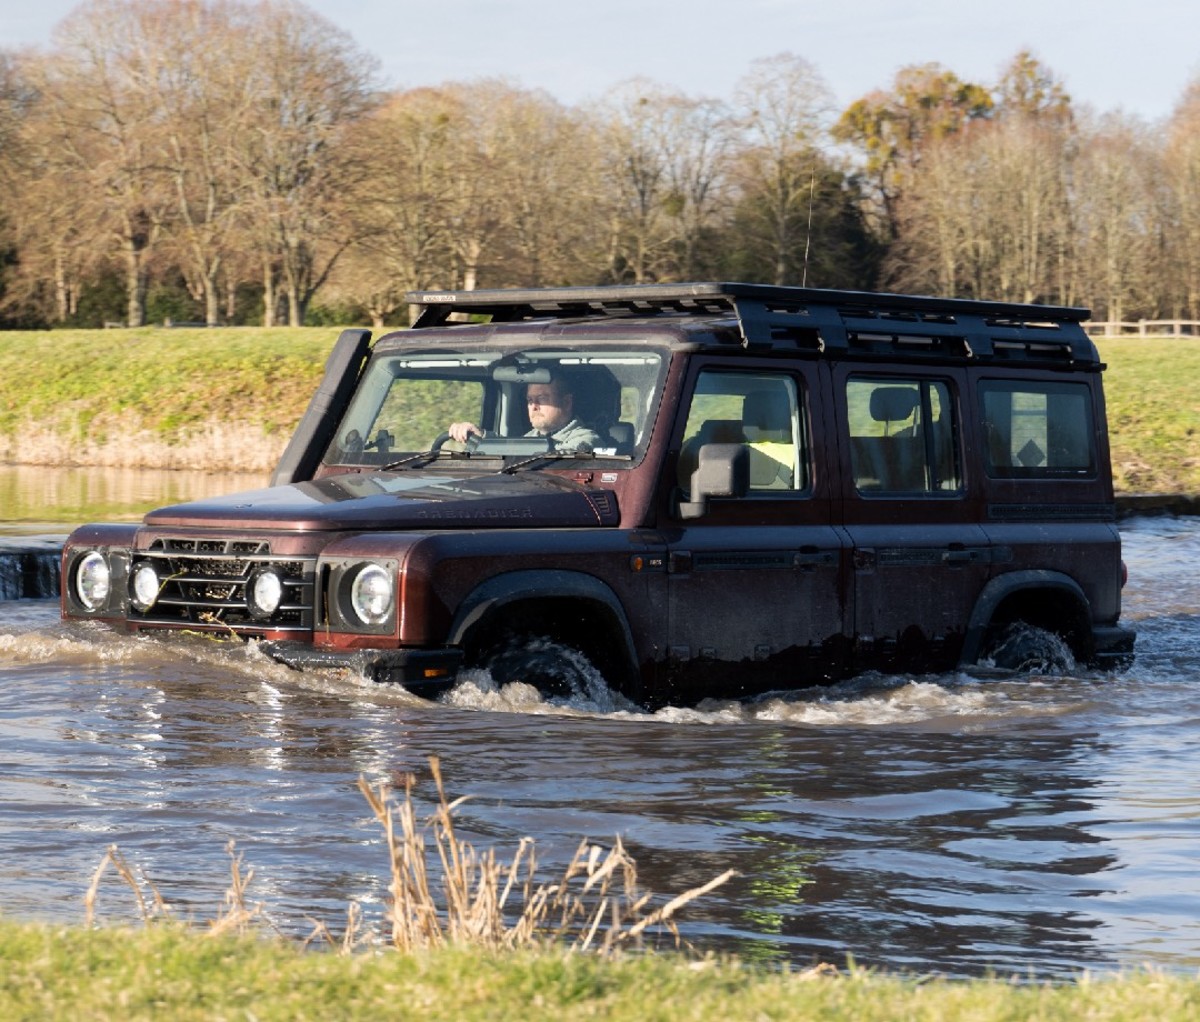 Boxy maroon 4x4 SUV driving through a deep pond with a field and trees in the background.